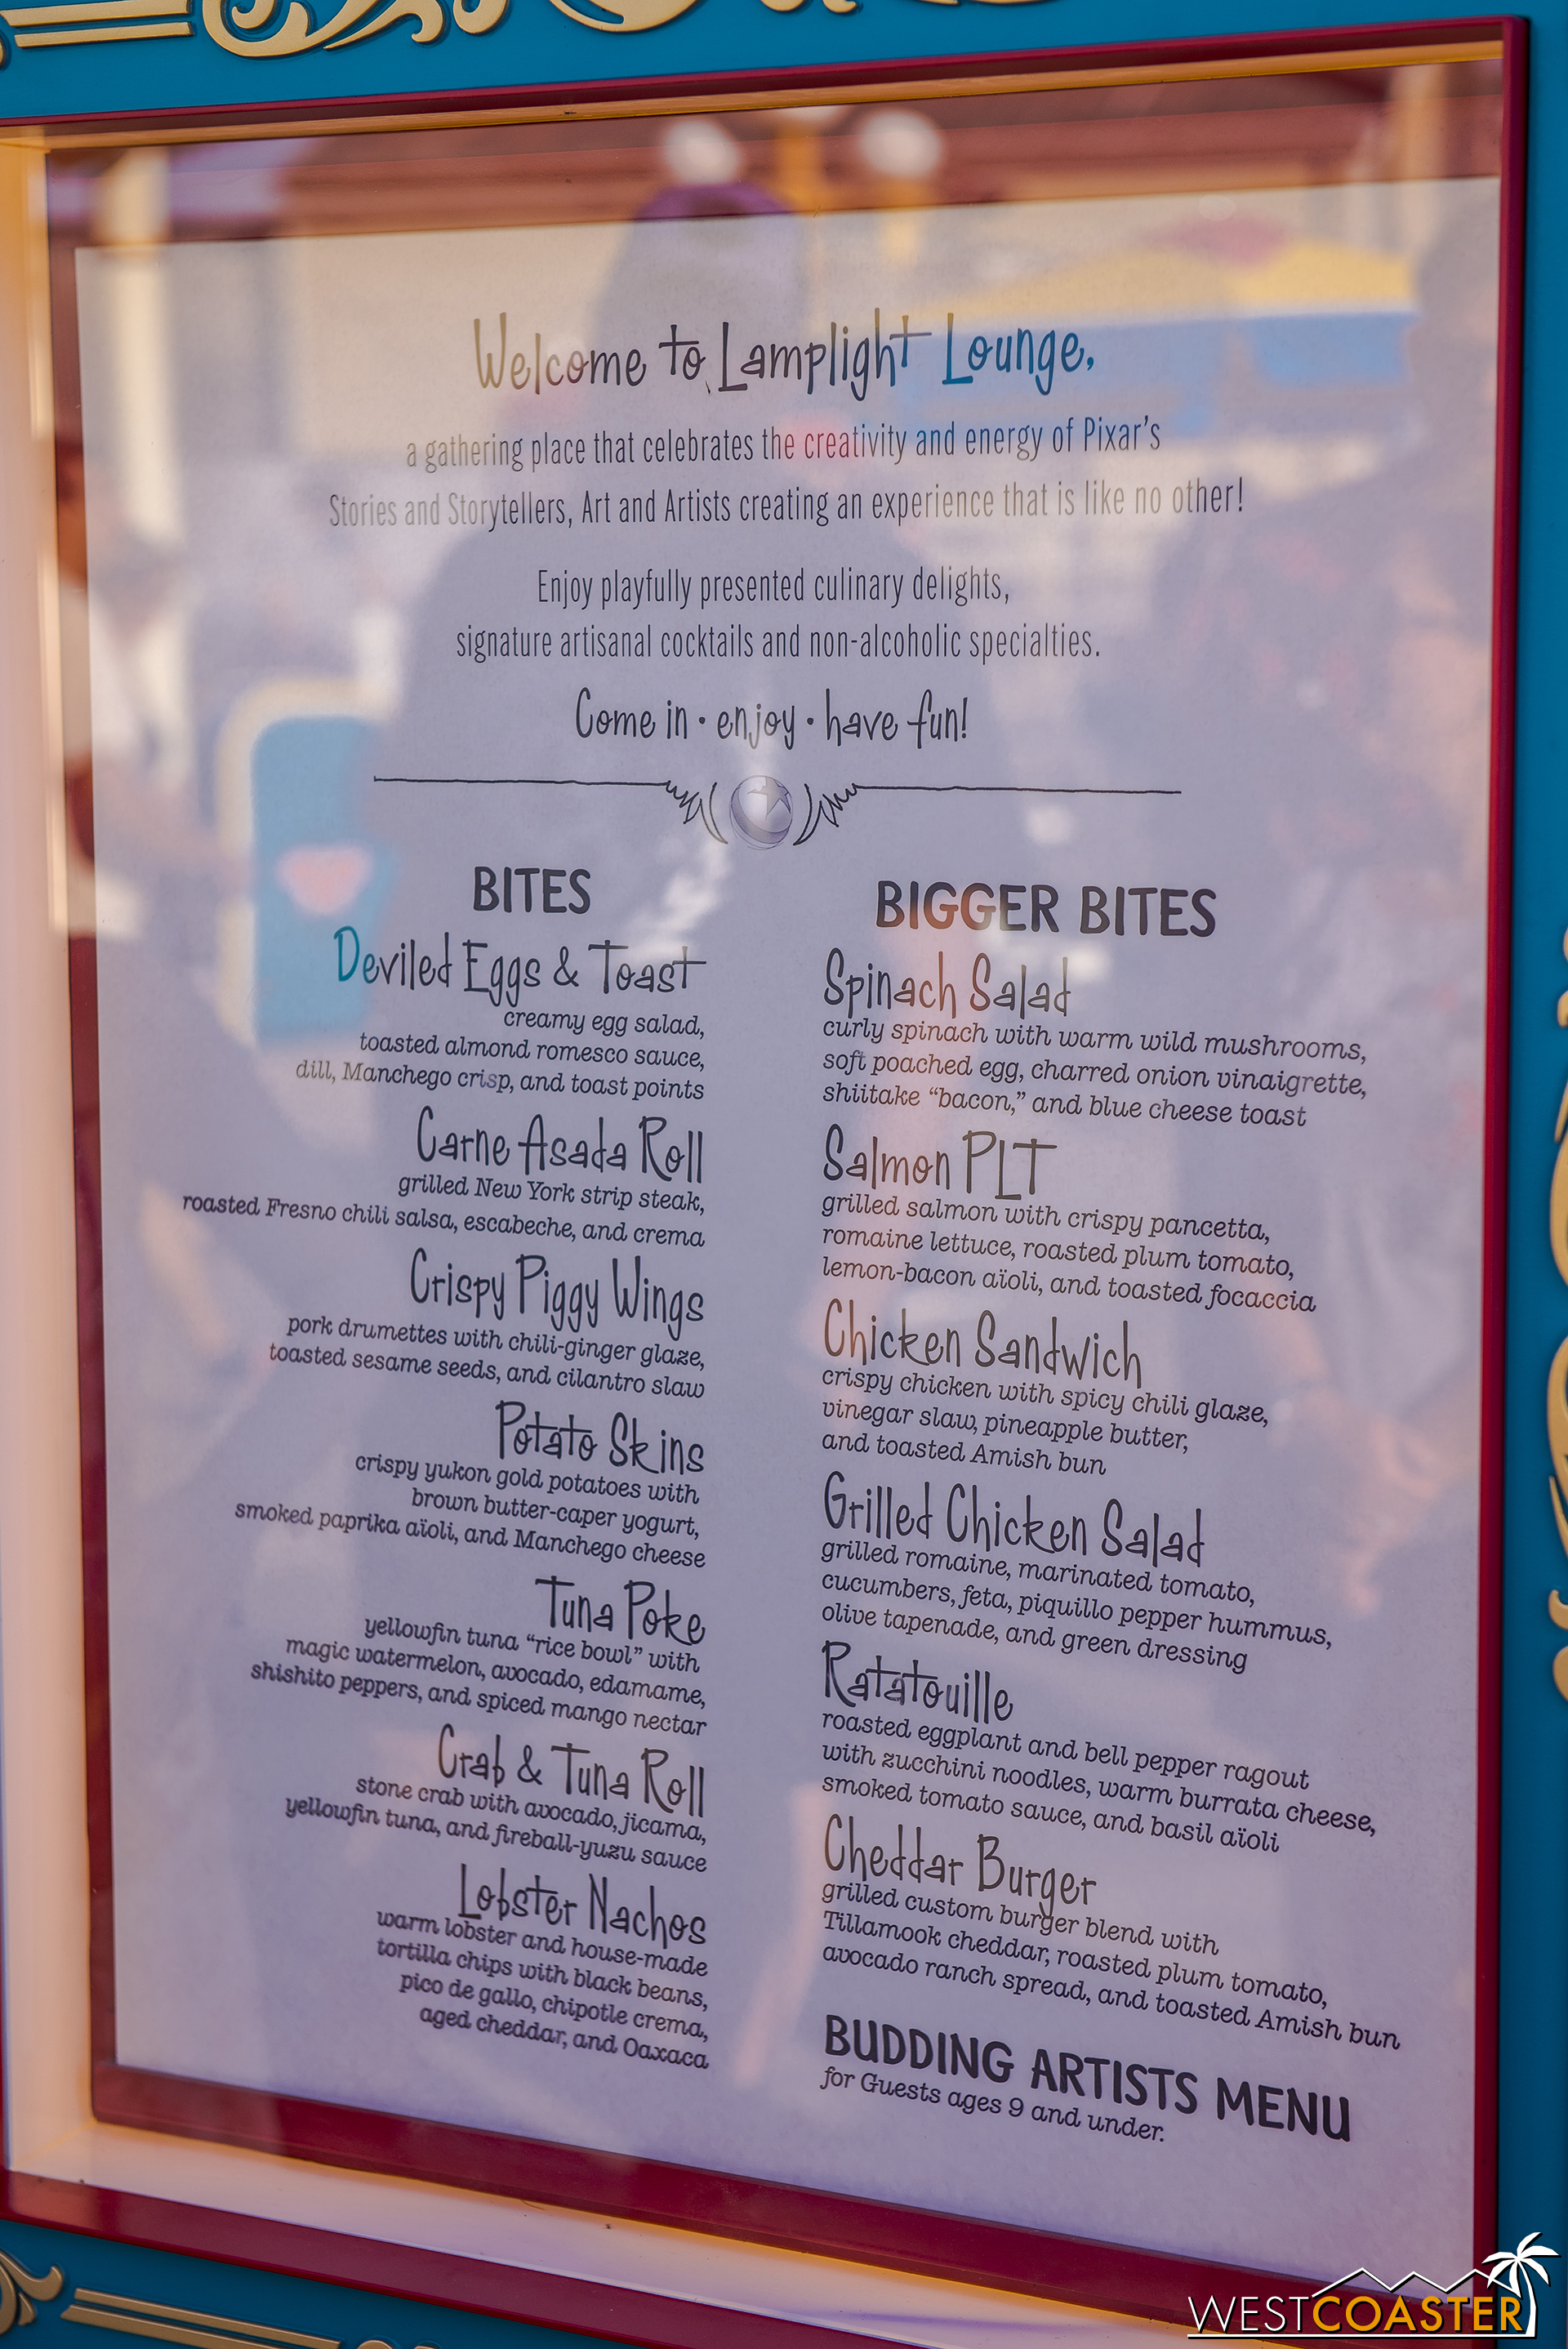  Here’s the Lamplight Lounge bar menu.  Lots of tasty items! 